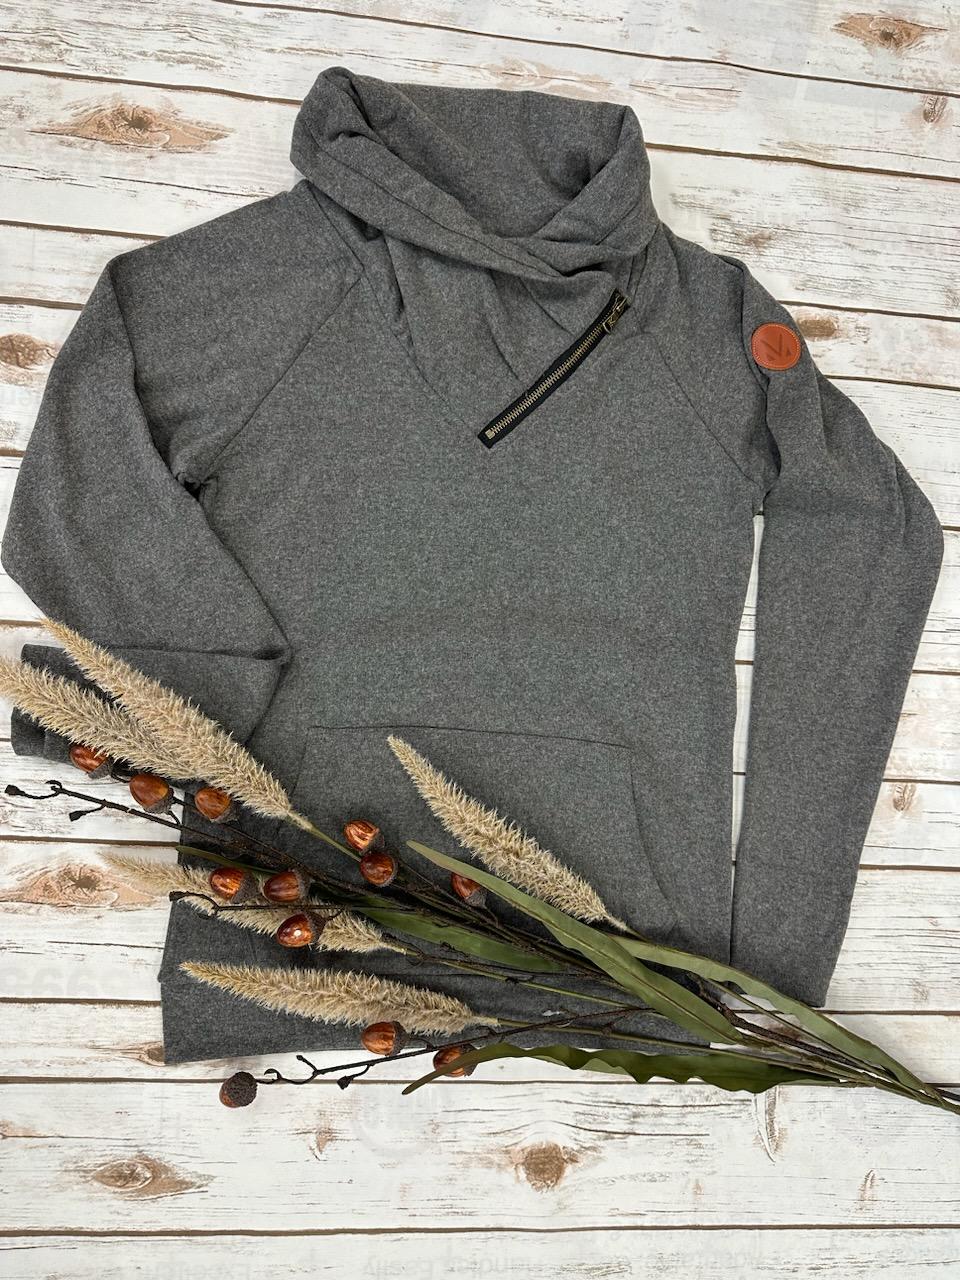 IN STOCK Classic ZipCowl Sweatshirt - Charcoal - AnnRose Boutique